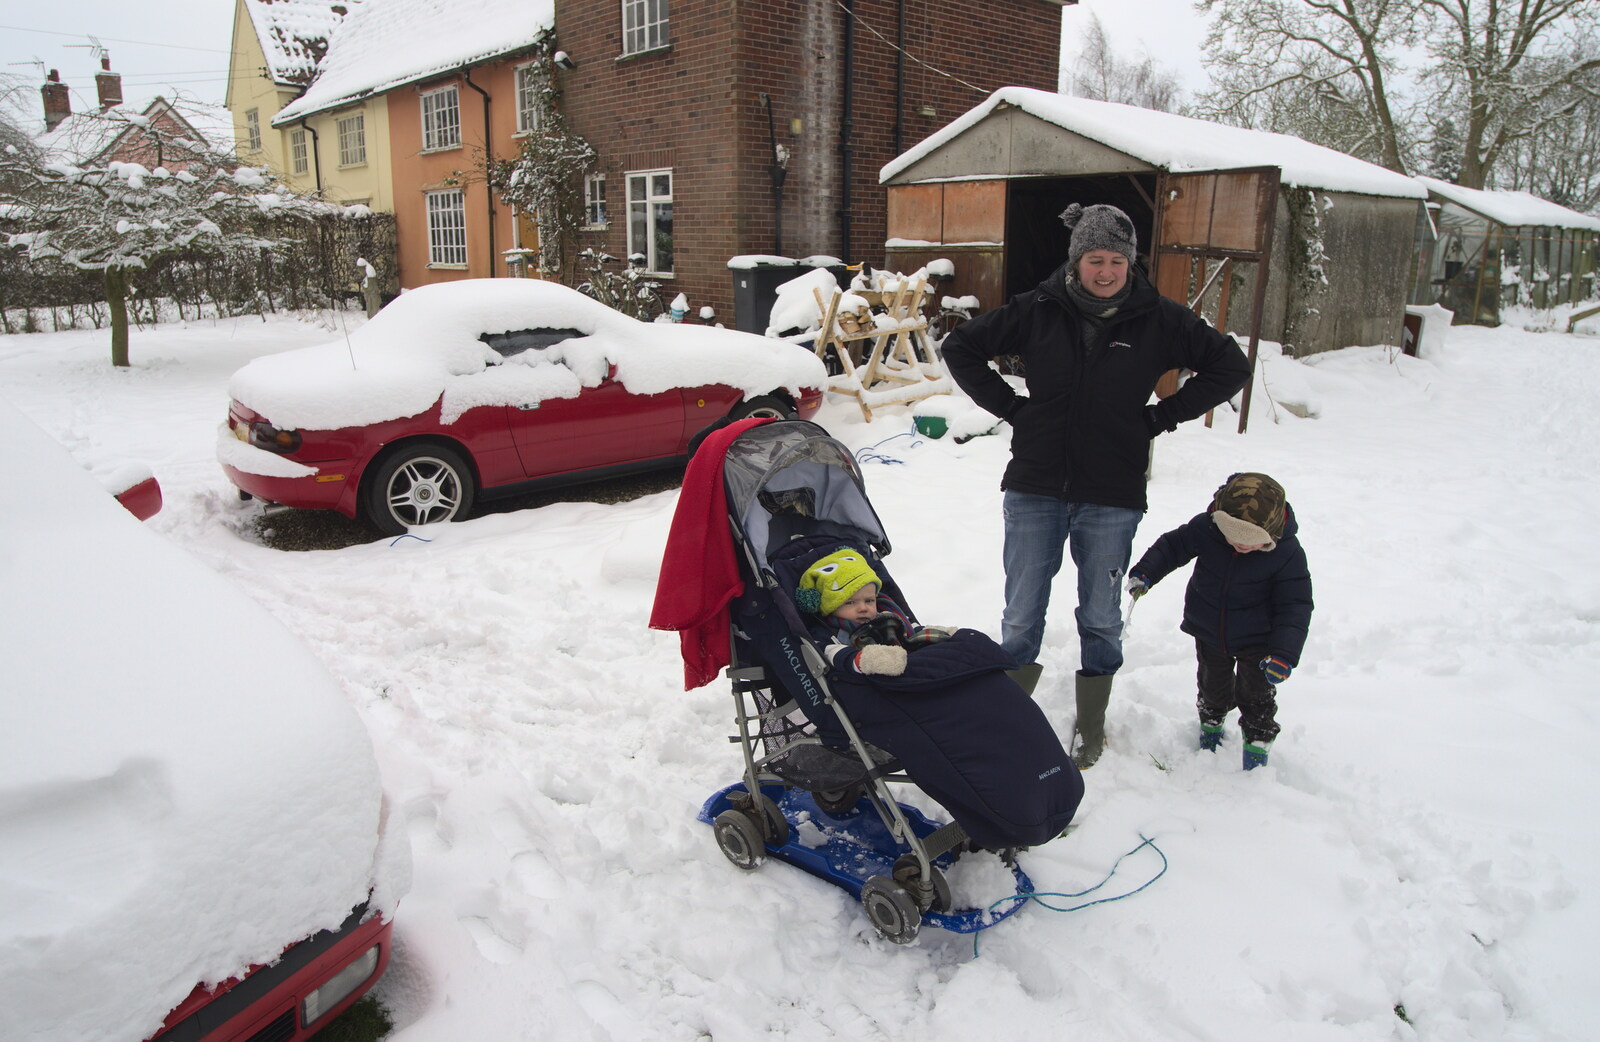 More Snow Days and a Wind Turbine is Built, Brome, Suffolk - 19th January 2013: Harry's out in his buggy